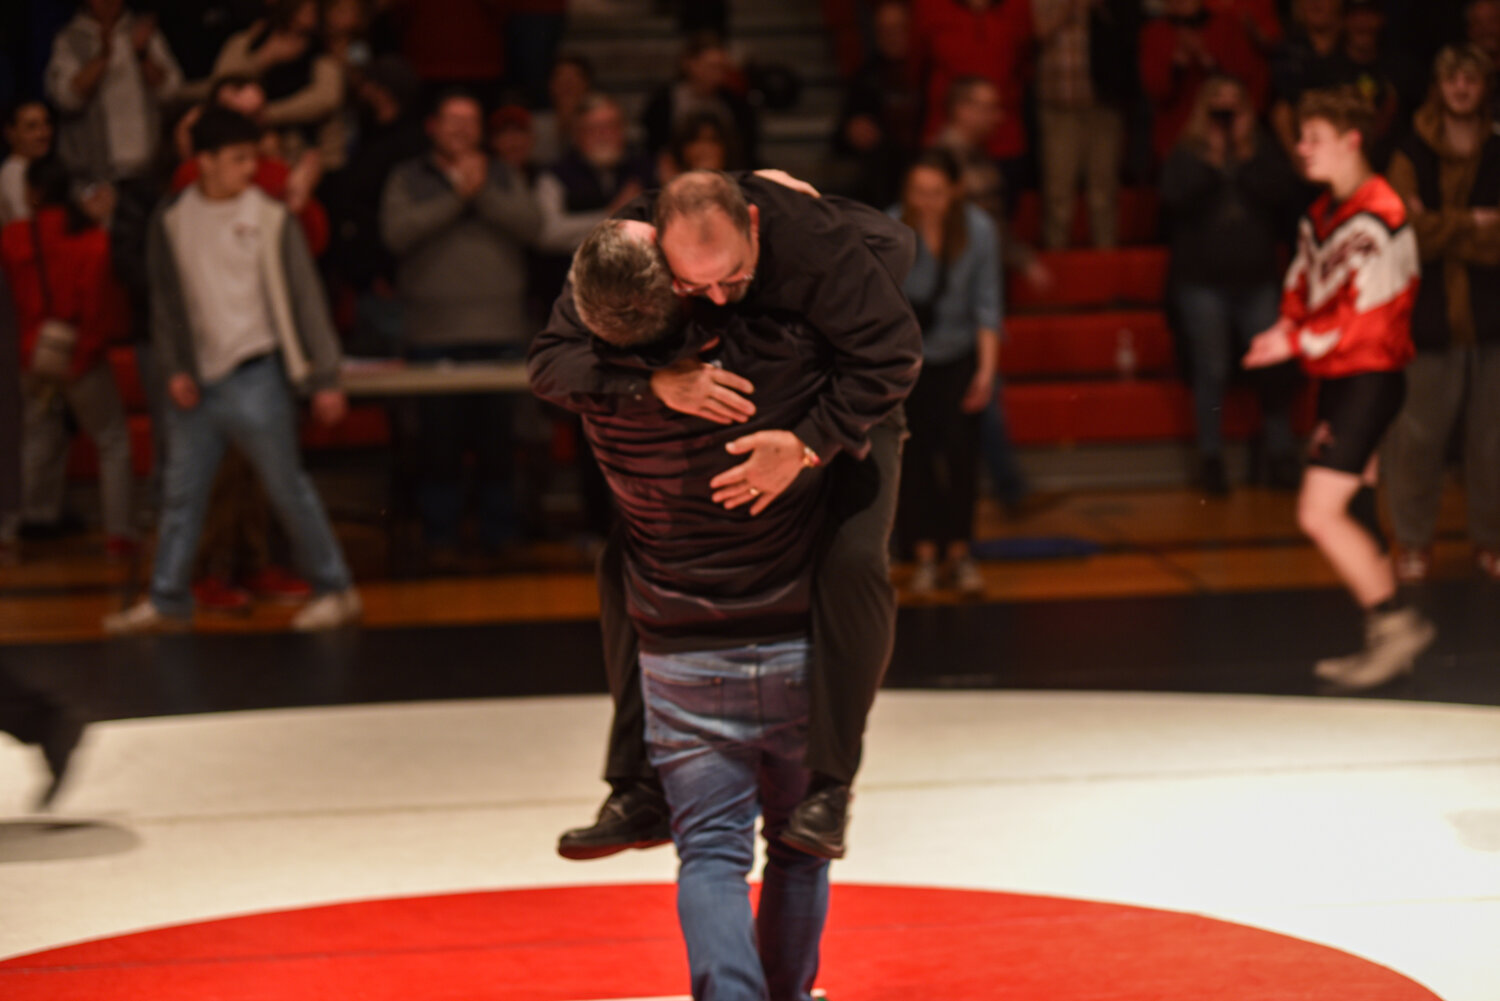 Yelm's head coach Gaylord Strand celebrates with Bethel's head coach Matt Lininger after the "Bad to the Bone" dual on Jan. 23 between the Tornados and the Bison.